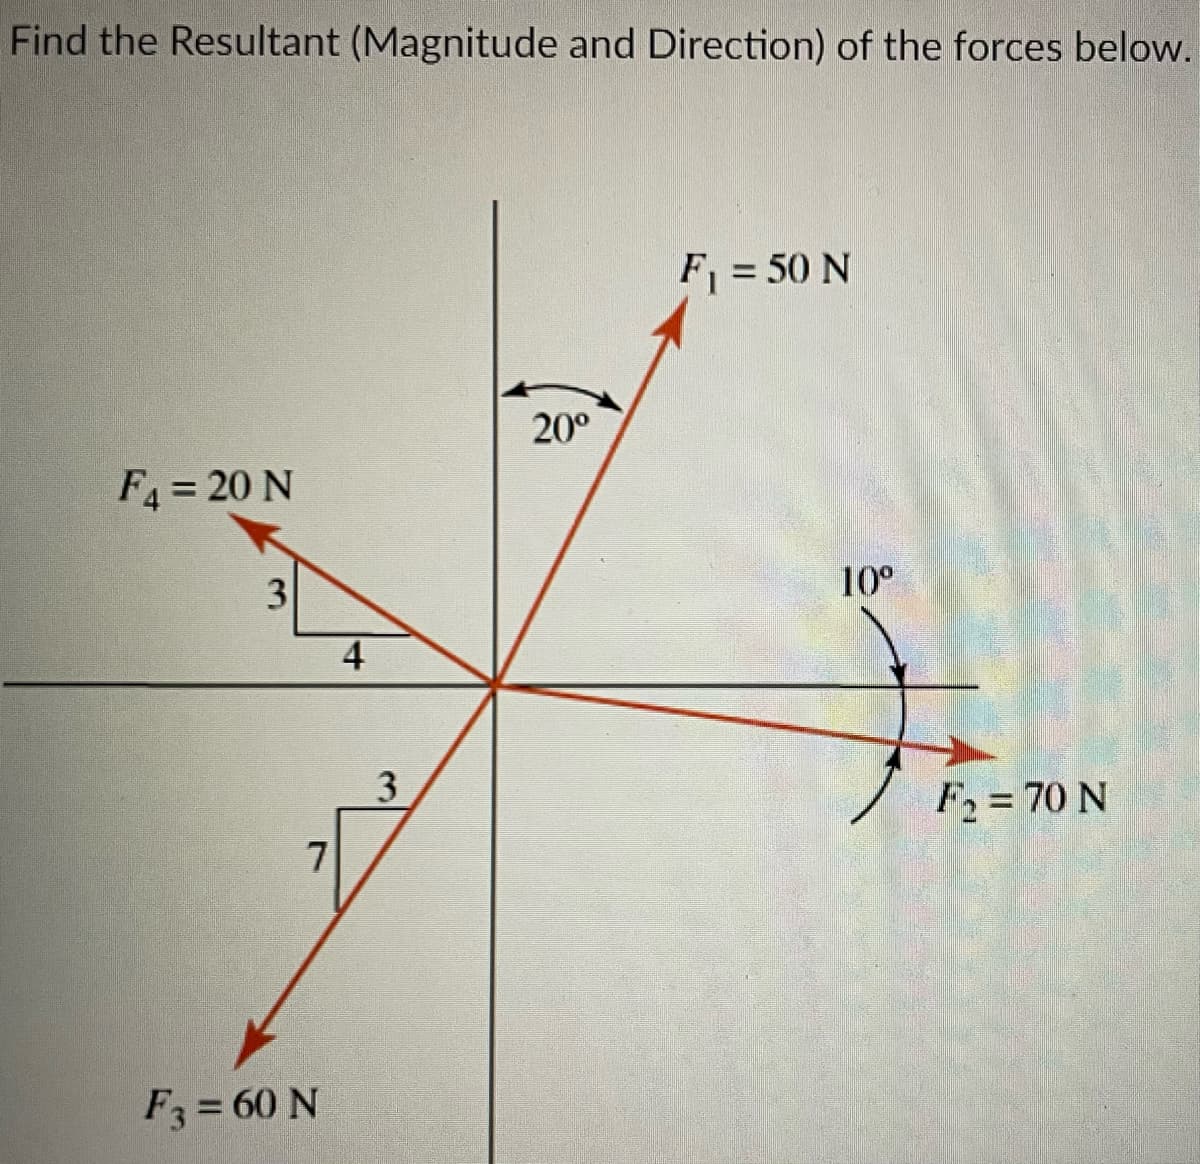 Find the Resultant (Magnitude and Direction) of the forces below.
F4 = 20 N
3
7
F3 = 60 N
4
3
20⁰
F₁ = 50 N
10⁰
F₂ = 70 N